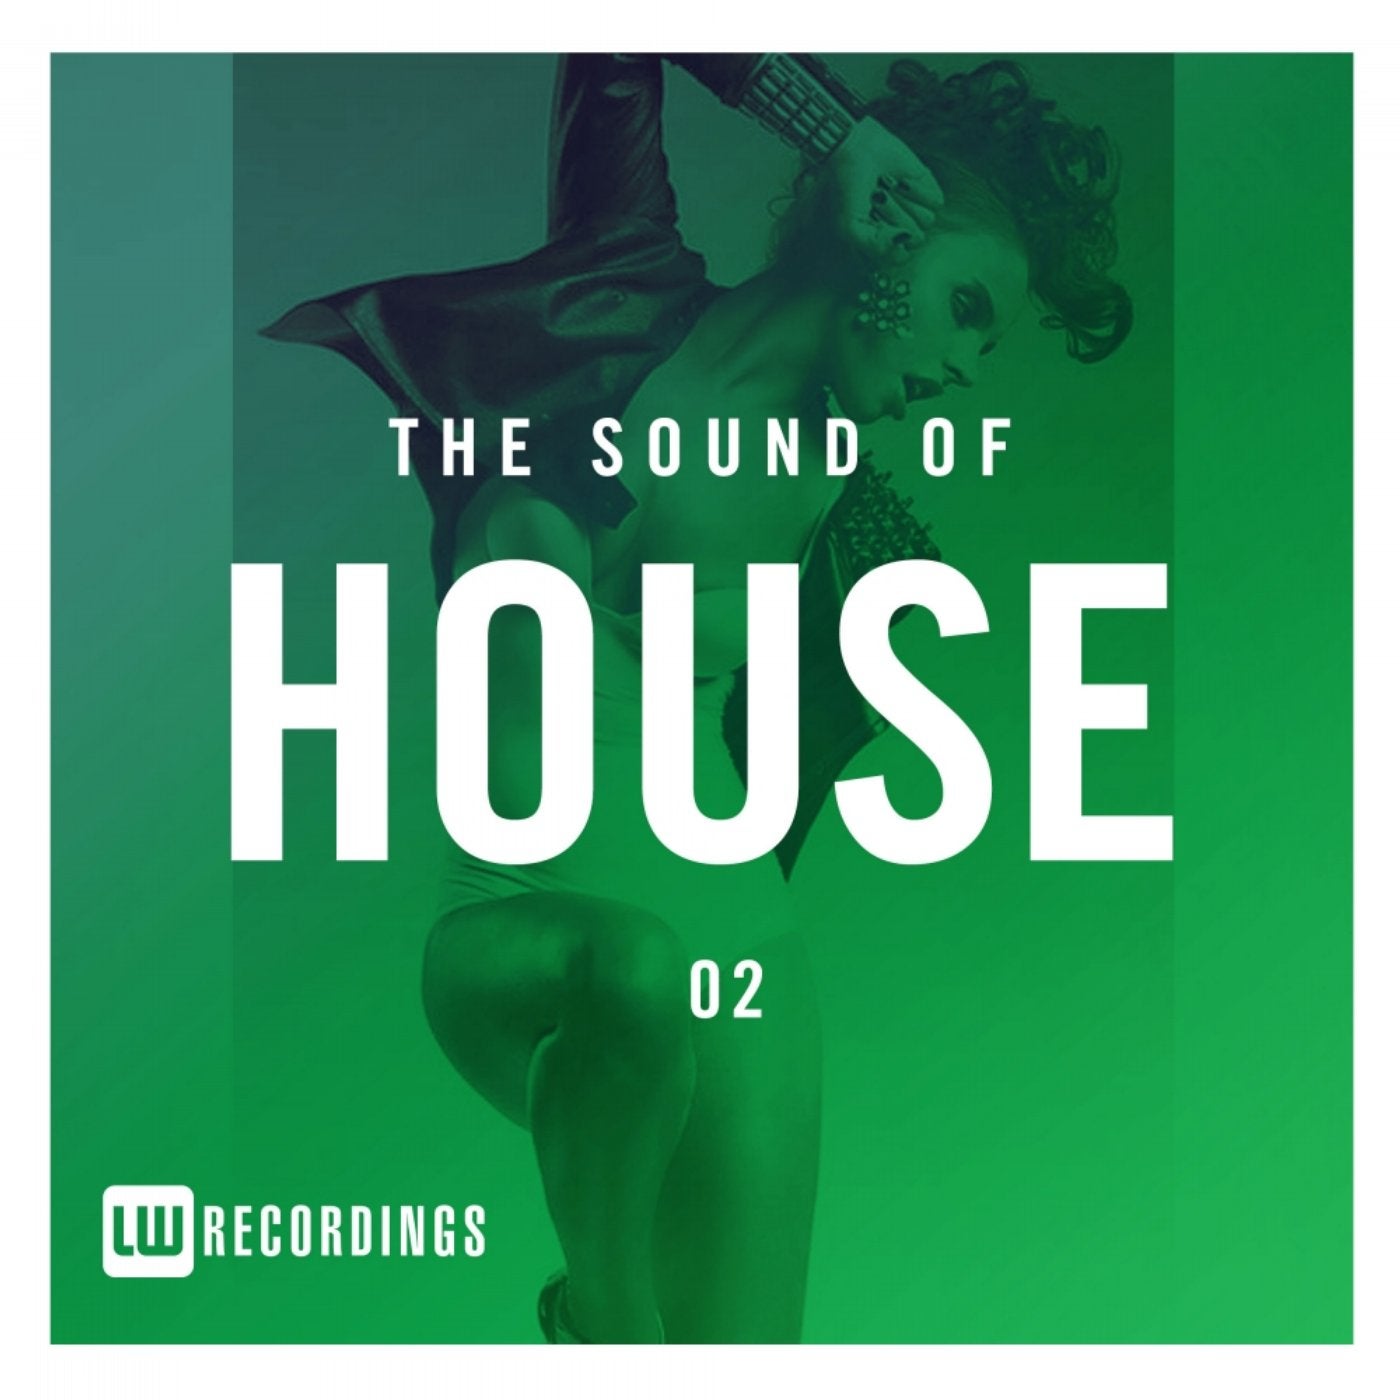 The Sound Of House, Vol. 02